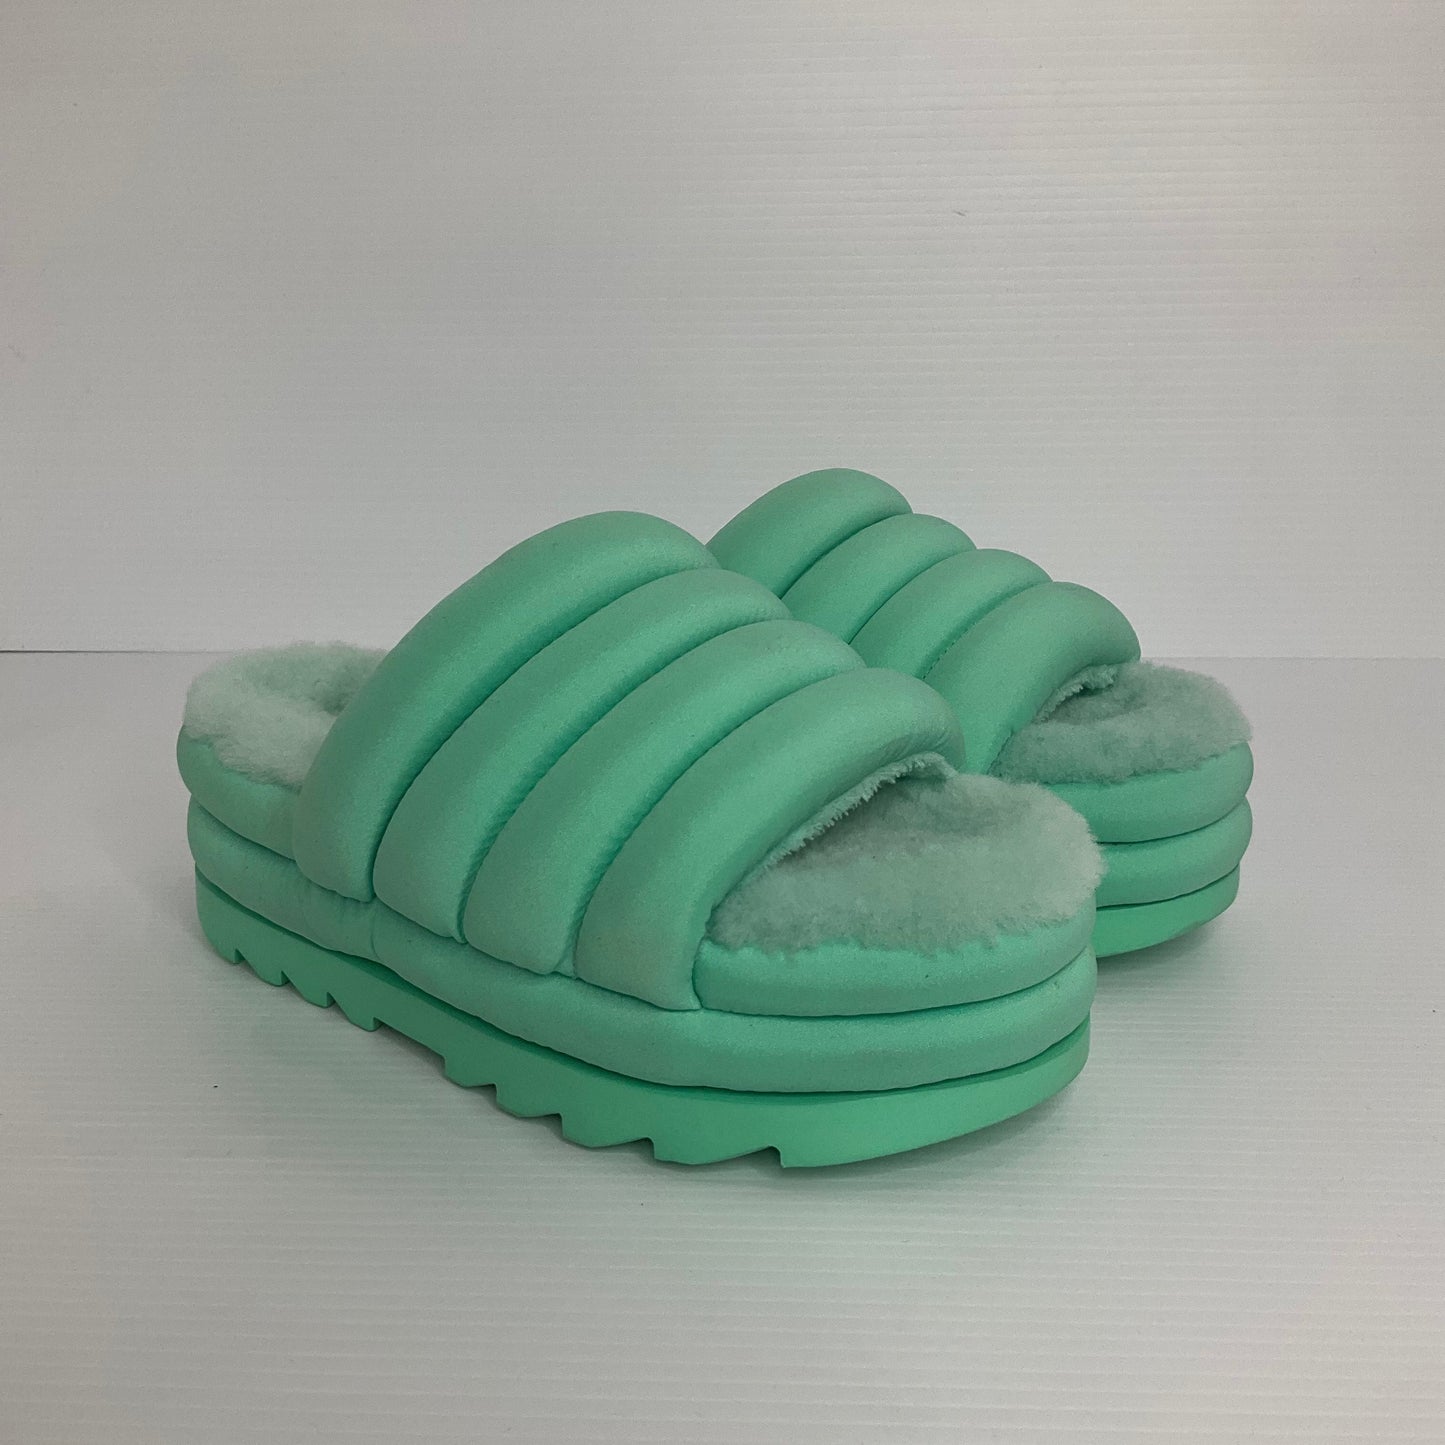 Teal Slippers Ugg, Size 8